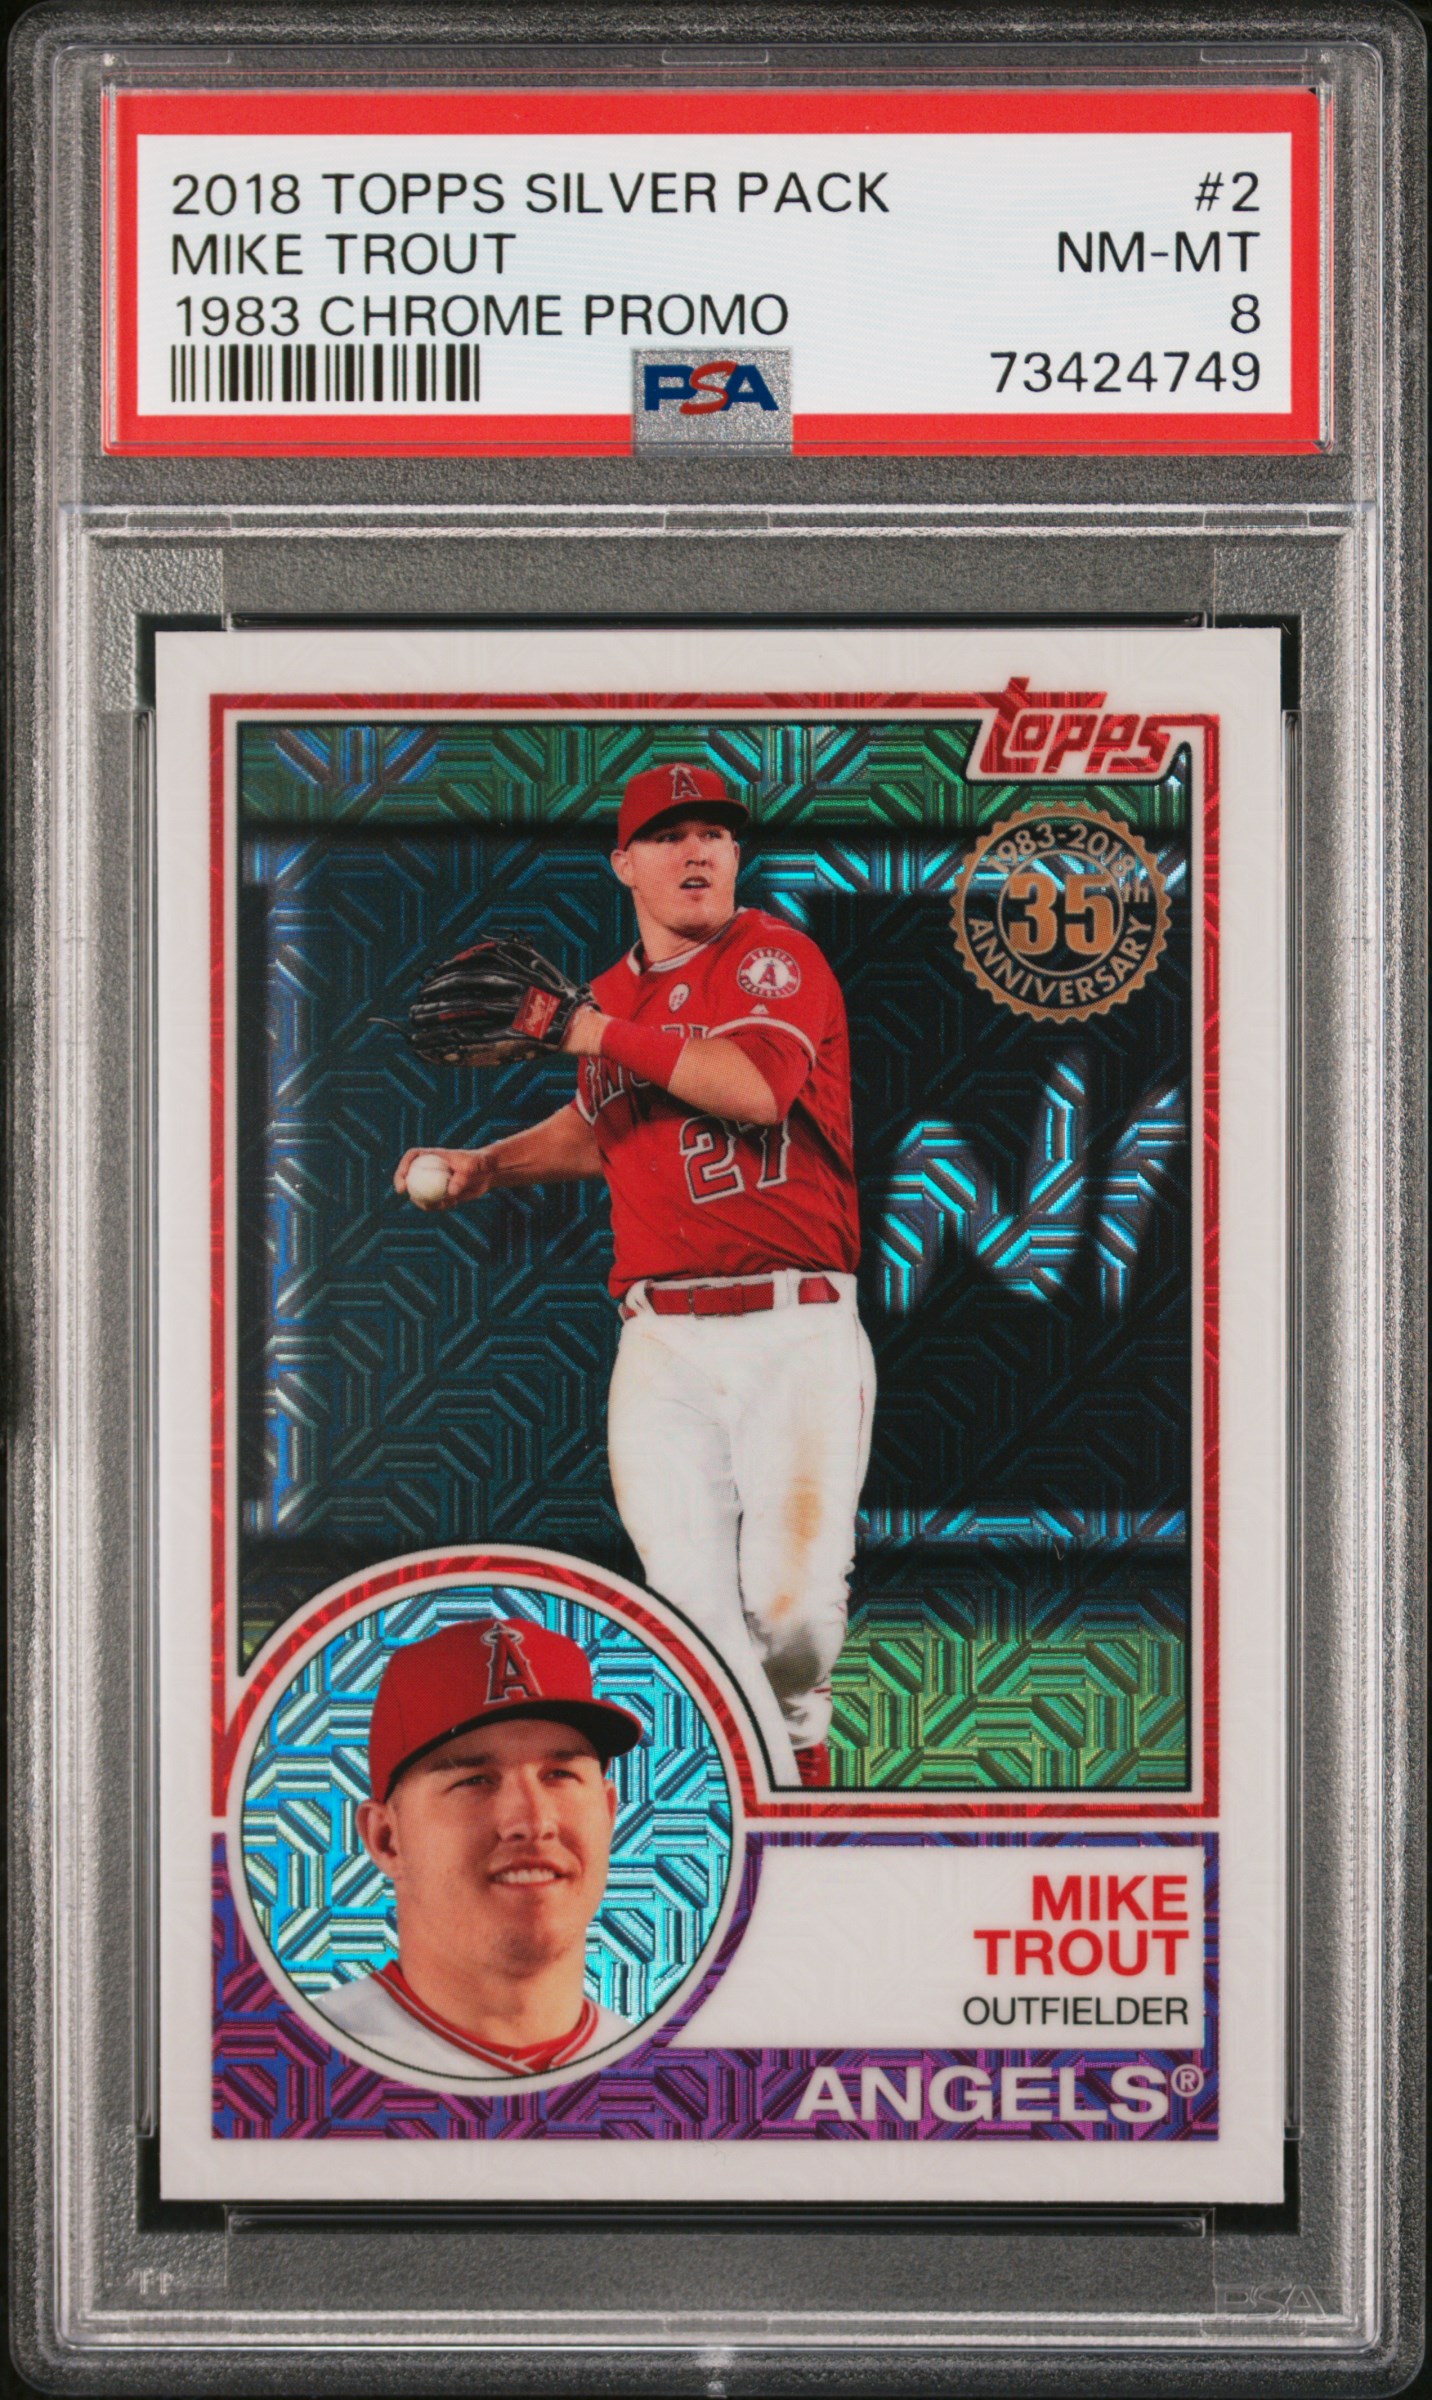 2018 Topps Silver Pack 1983 Chrome Promo  2 Mike Trout – PSA NM-MT 8